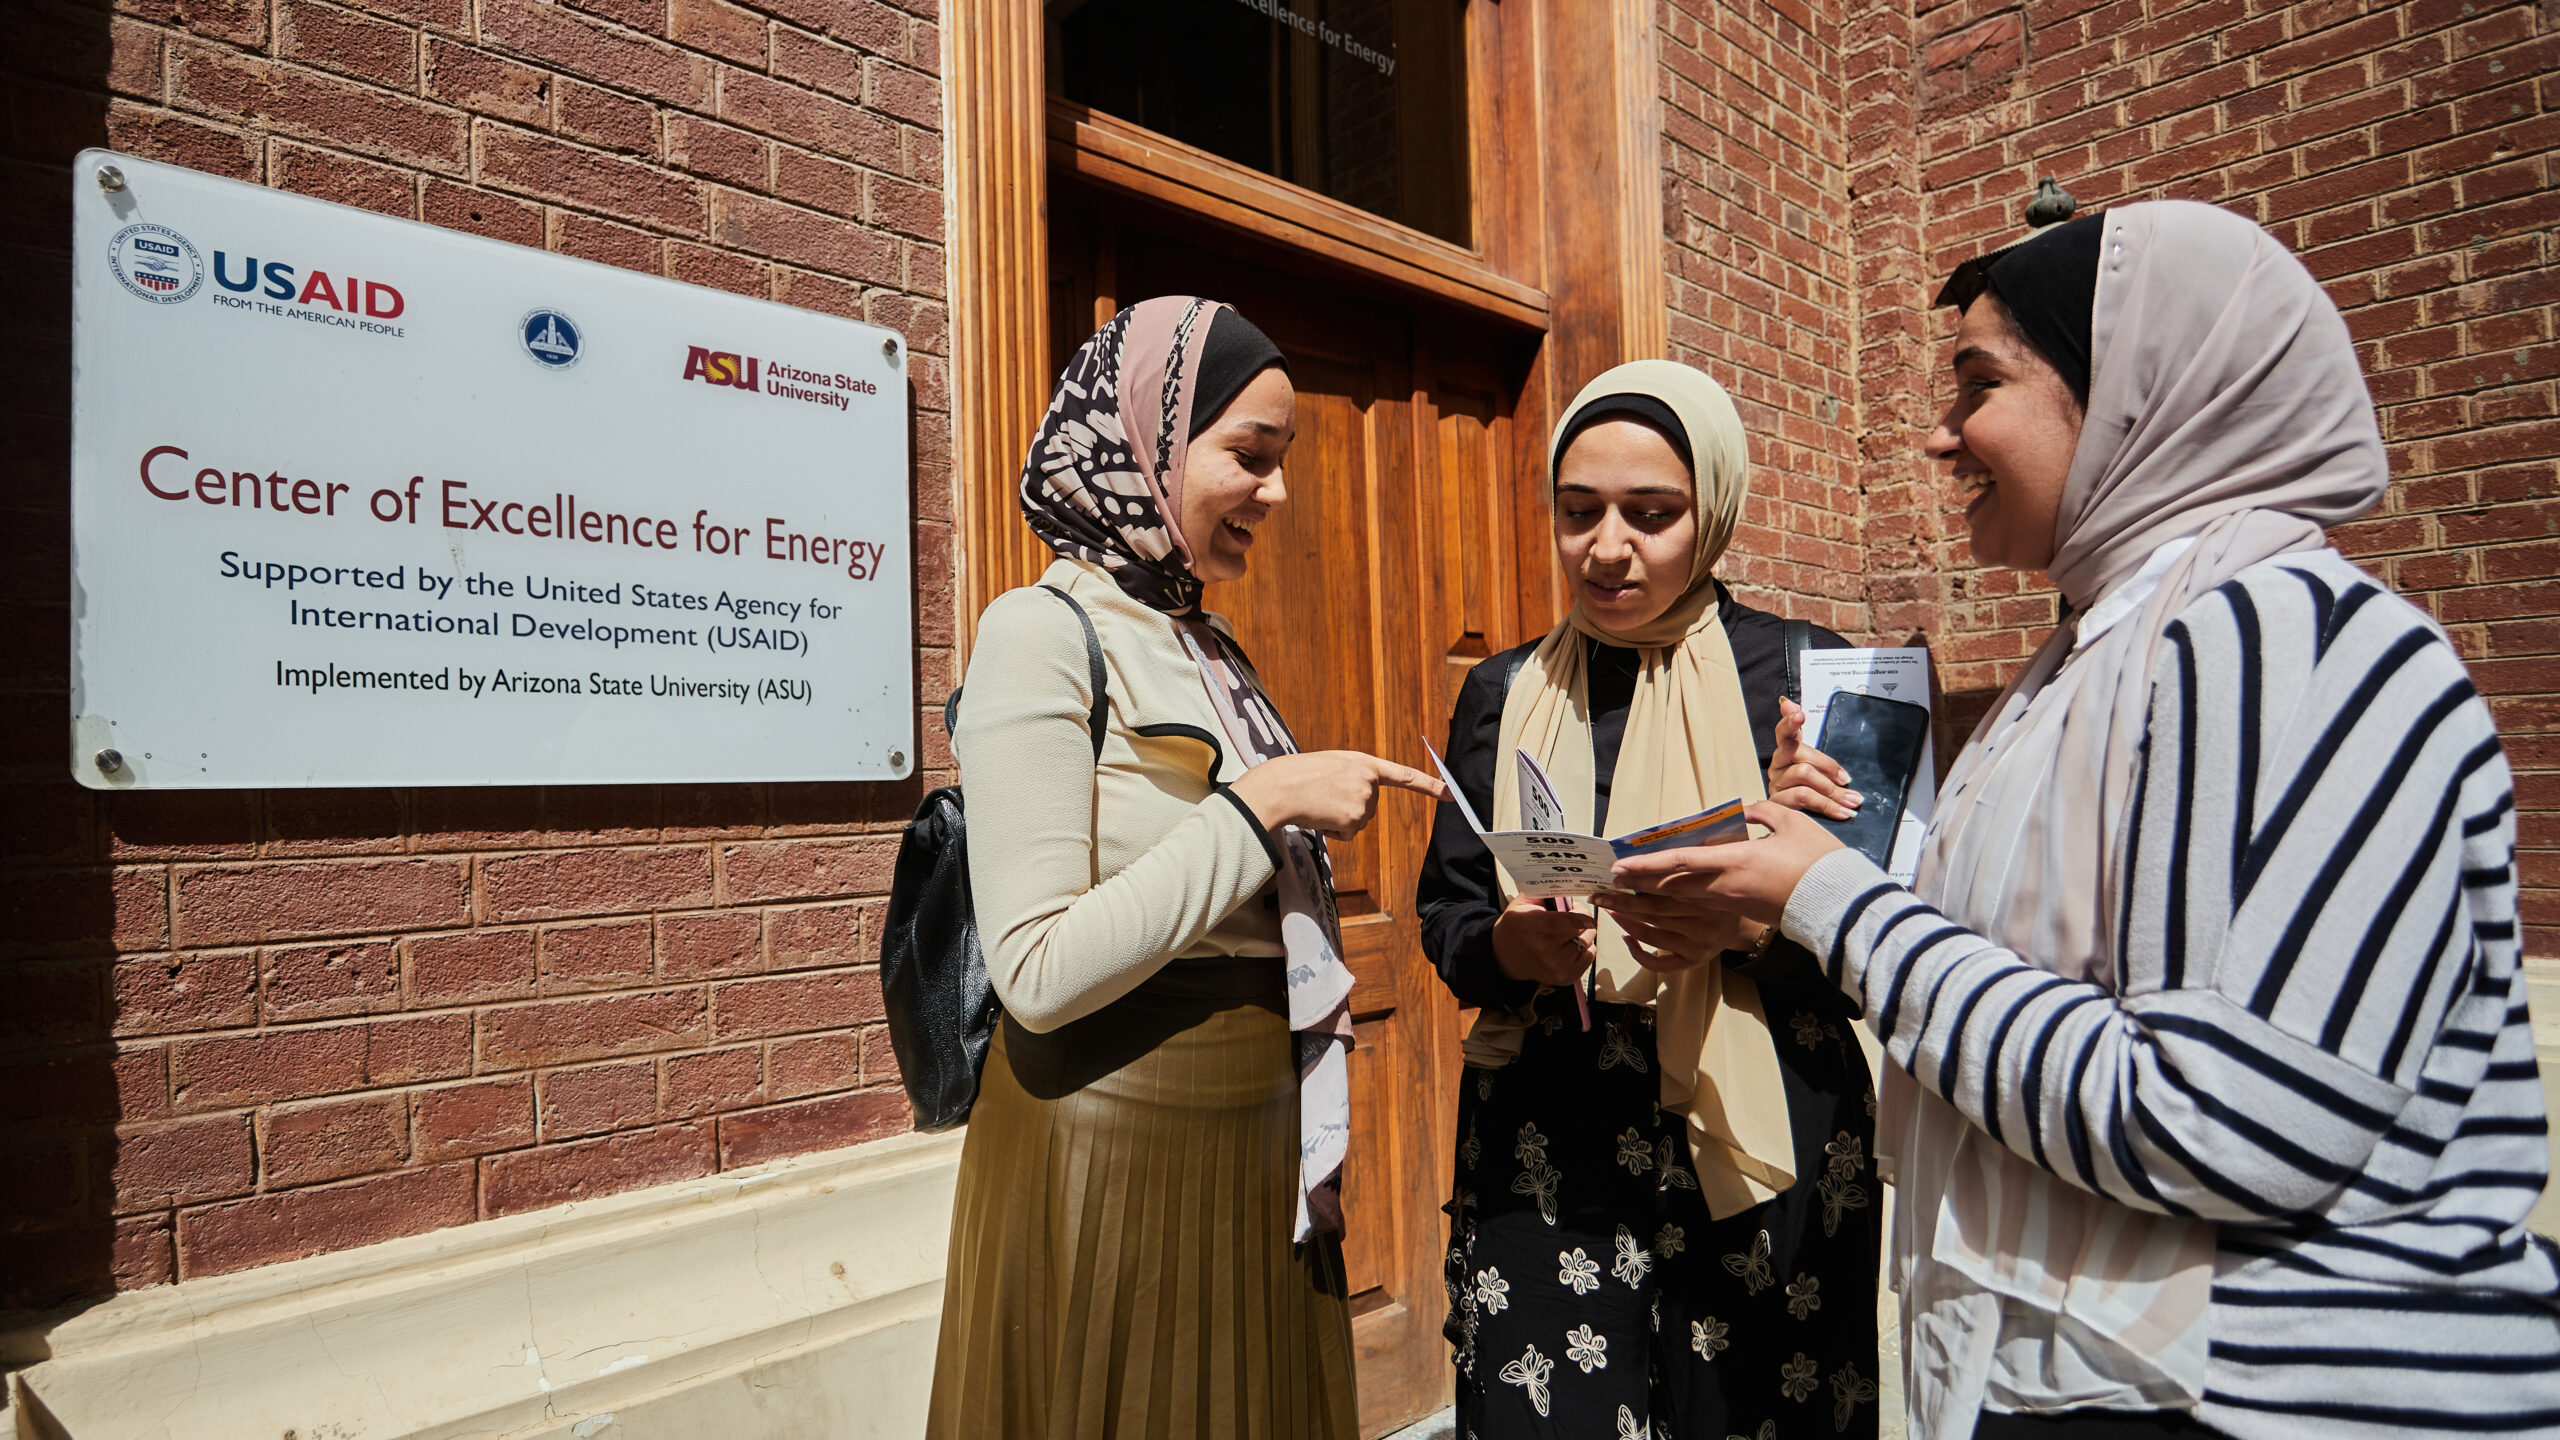 Three female students standing near entrance to Center of Excellence for Energy